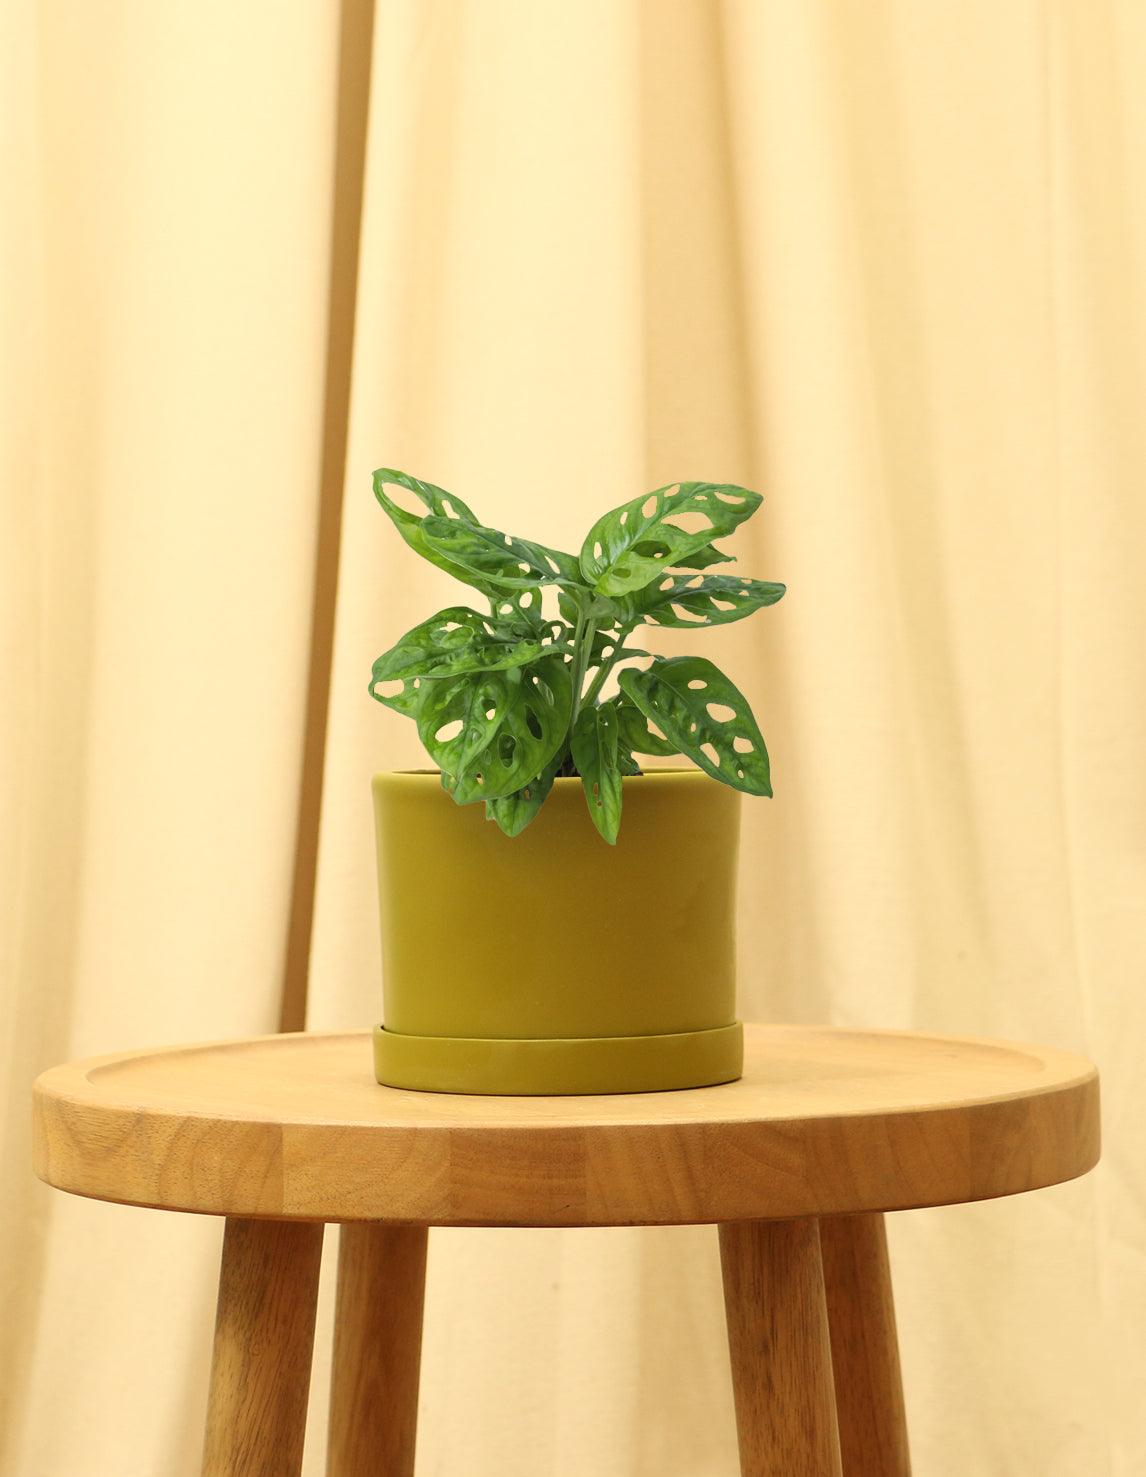 Small Swiss Cheese Plant in green pot.